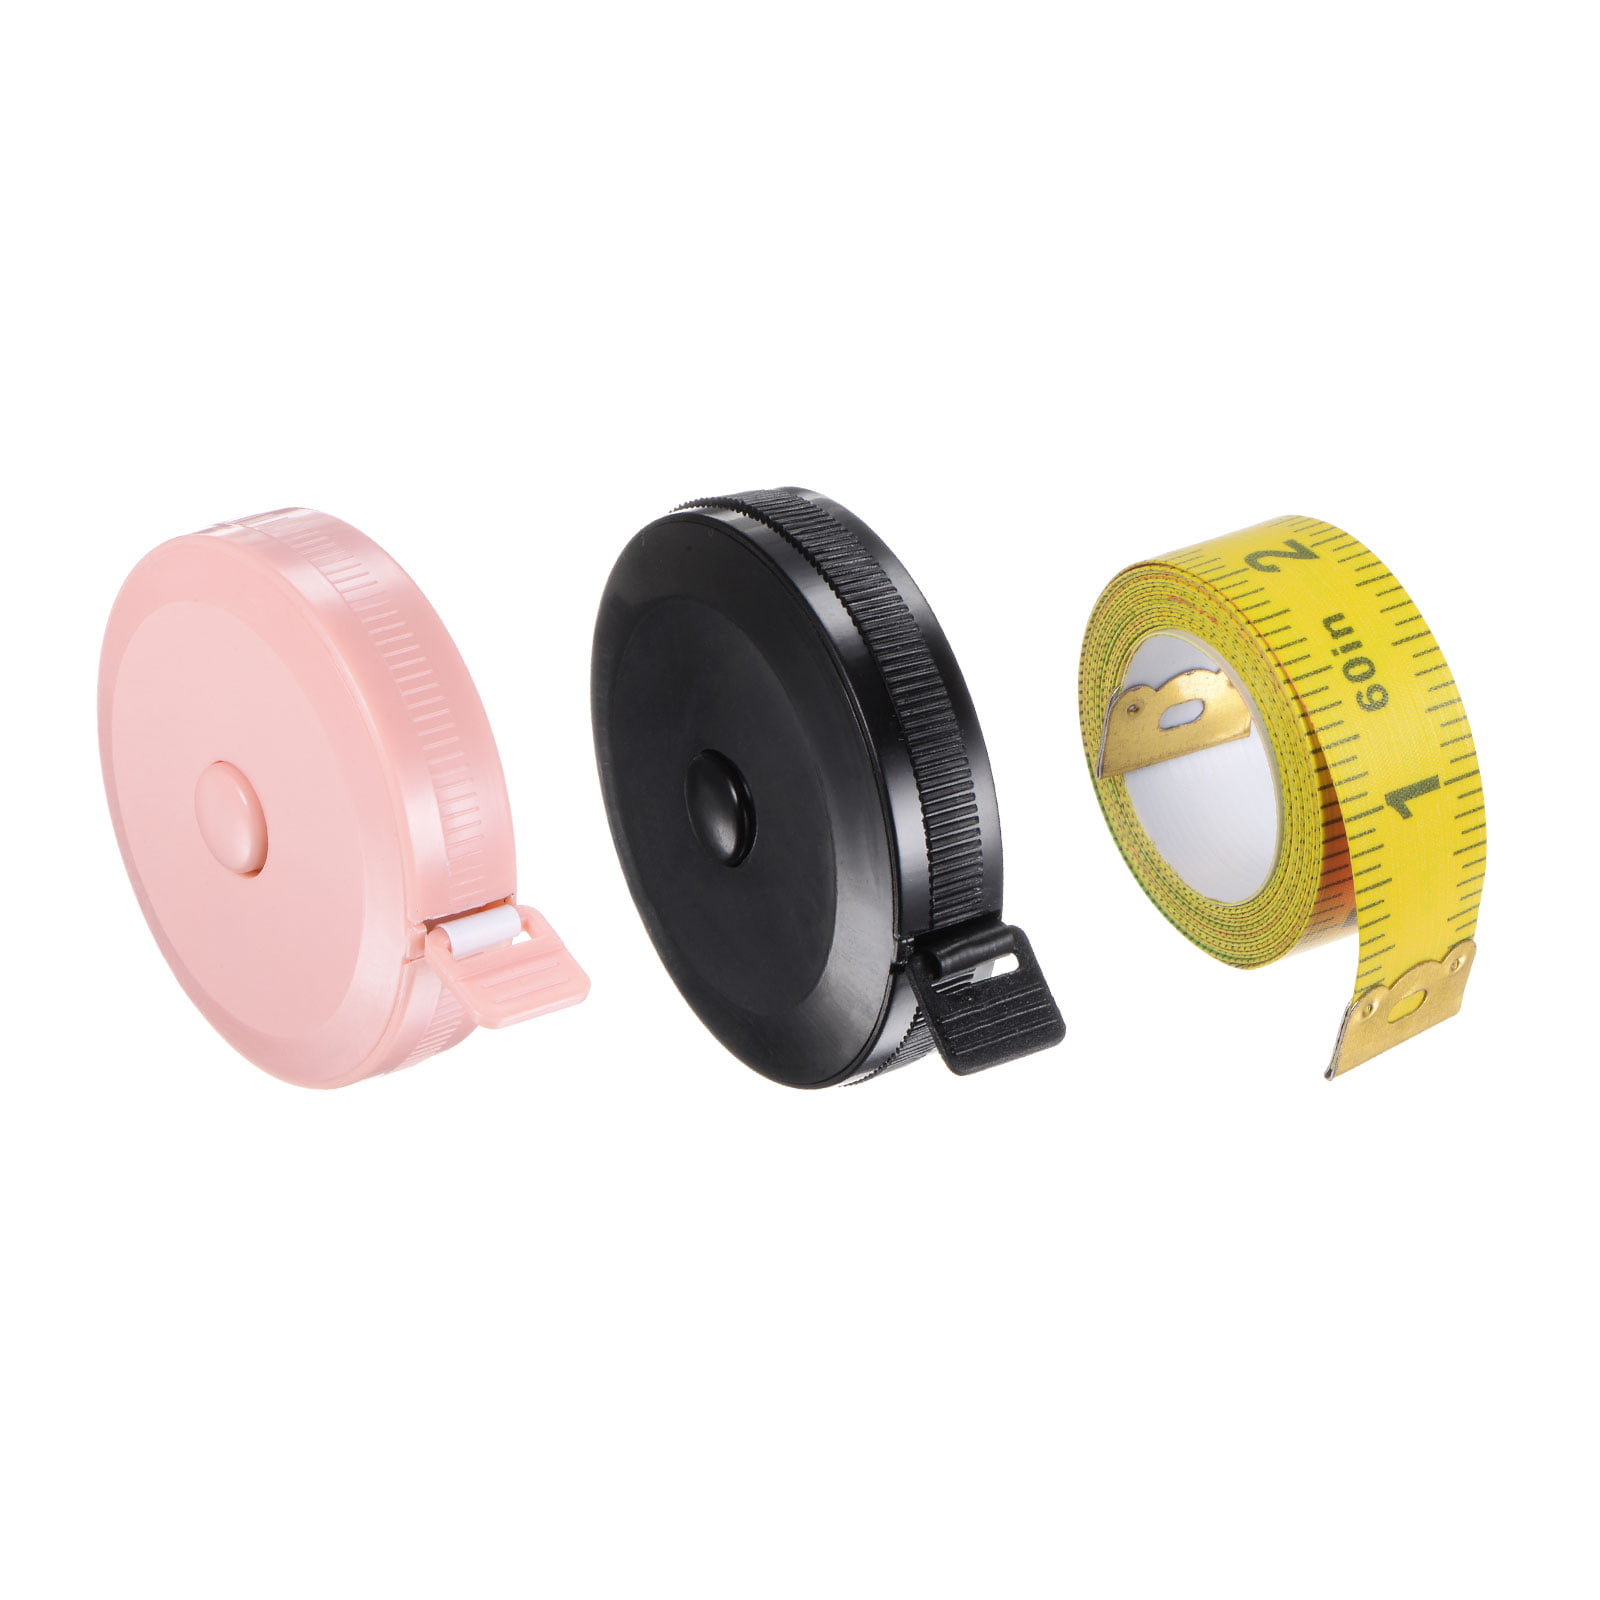 Pink Power 25ft Pink Lightweight Tape Measure for Womens Tool Kit with  Retractable Blade and Lock Button